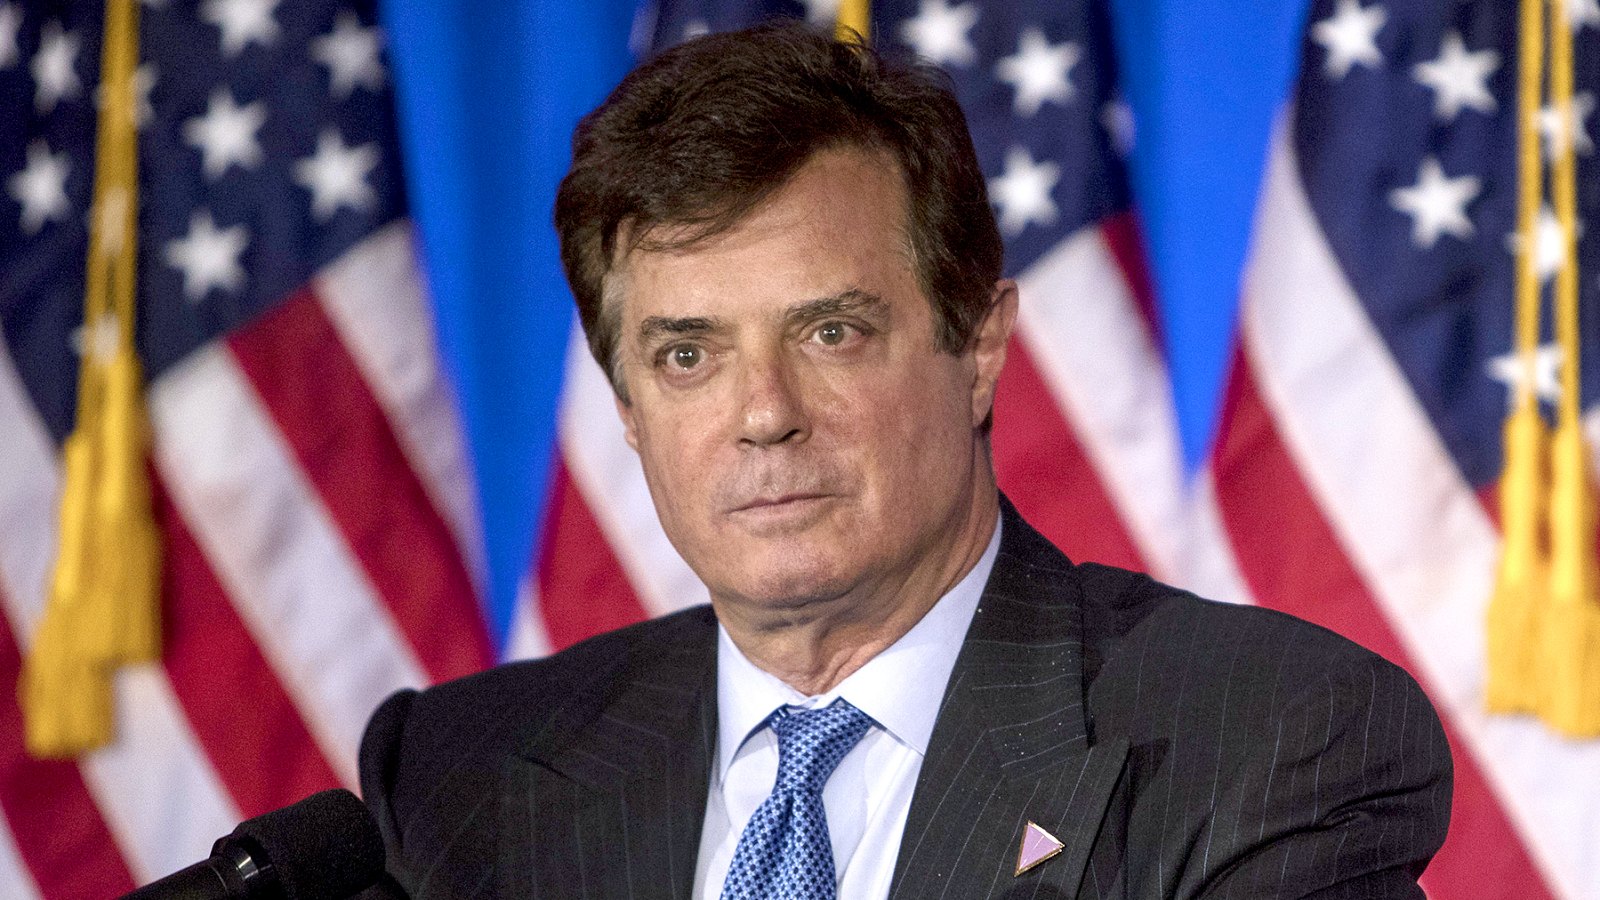 Paul Manafort stands on stage before Donald Trump, presumptive Republican presidential nominee, speaks during a primary night event at the Trump National Golf Club Westchester in Briarcliff Manor, New York, U.S., on Tuesday, June 7, 2016.